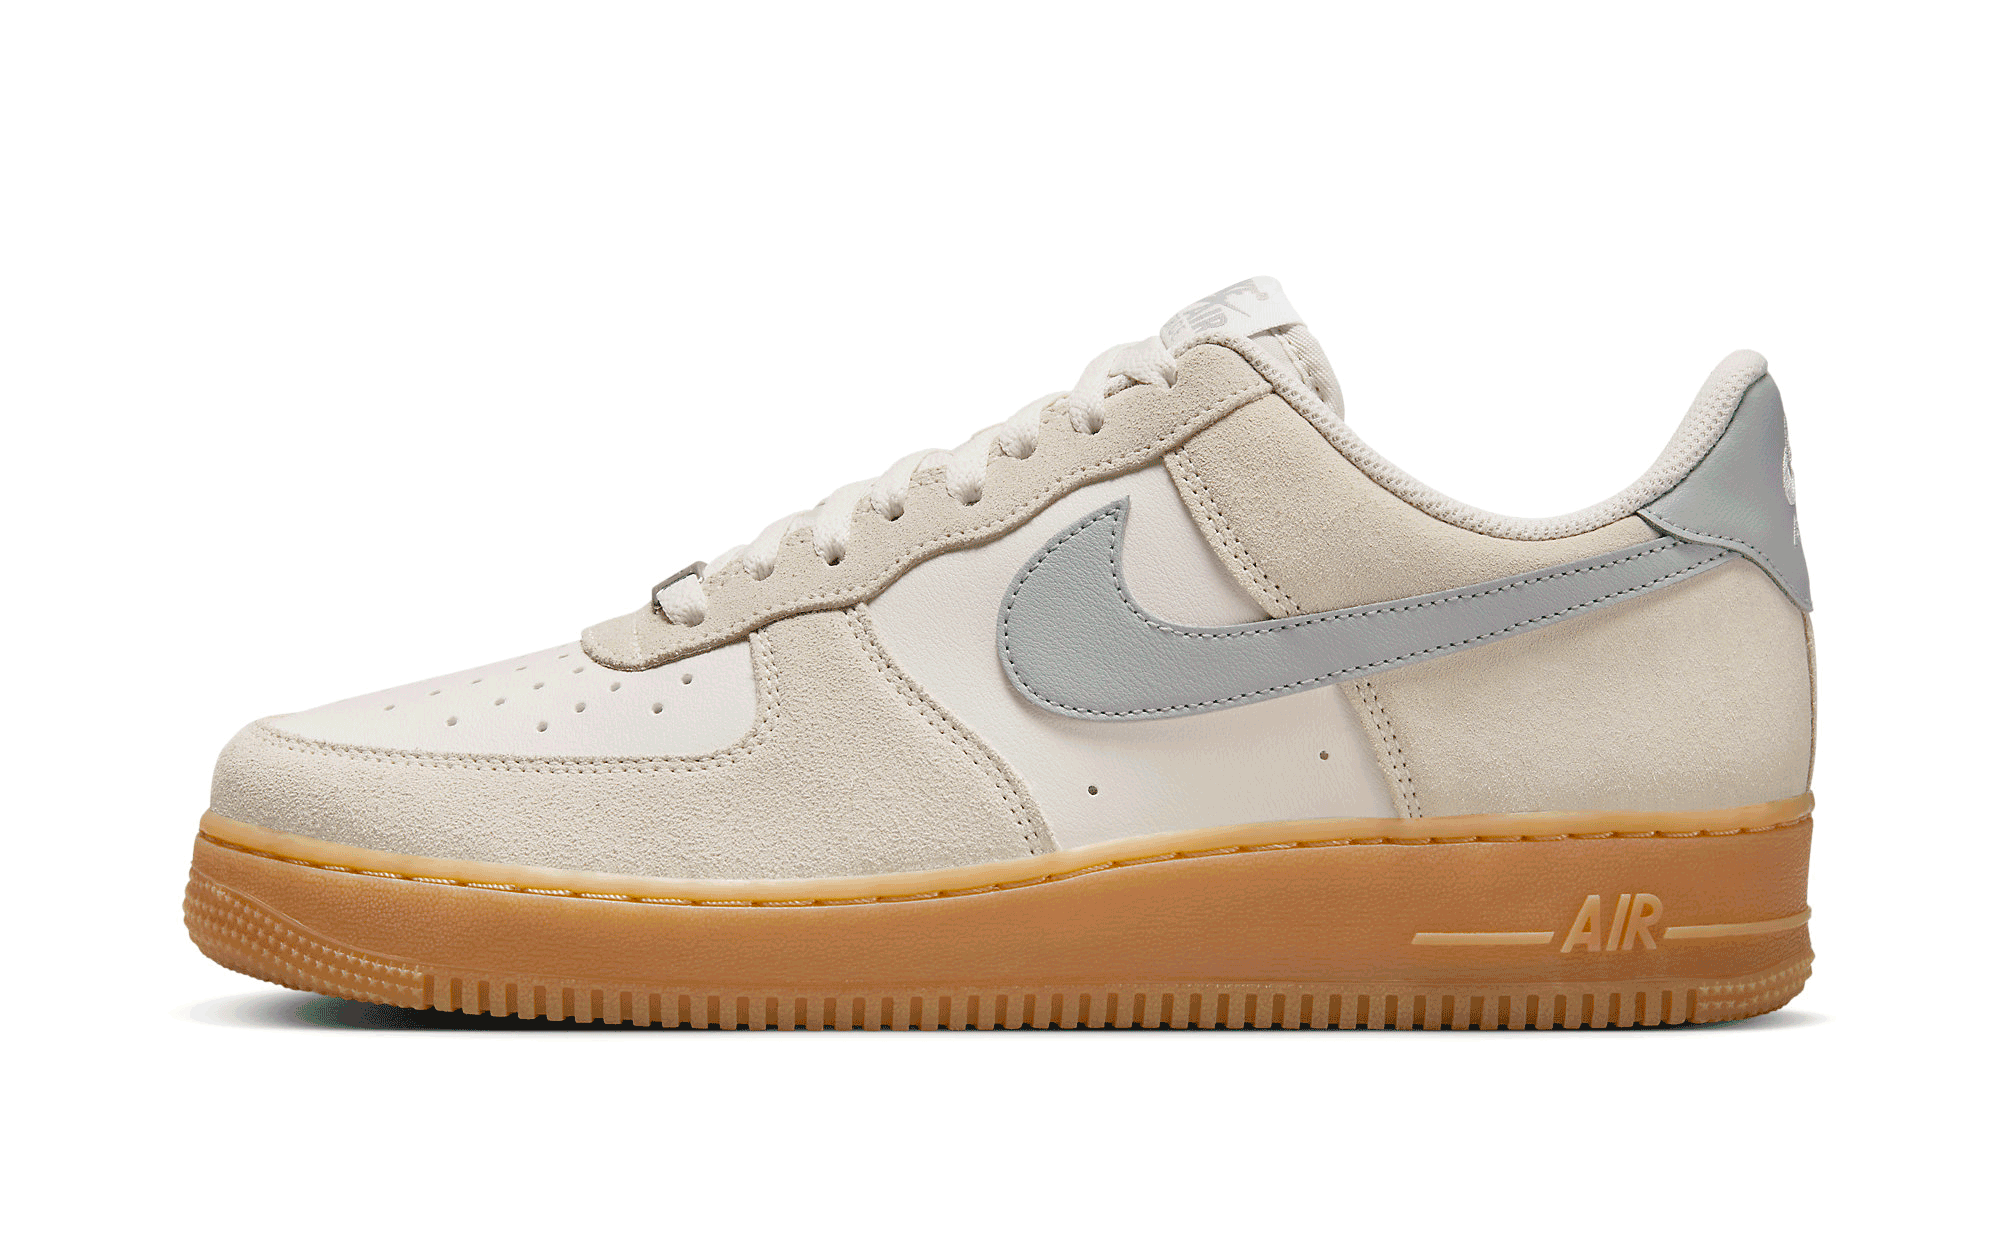 Nike Unveil Three-Pair Air Force 1 "Grey Gum" Collection